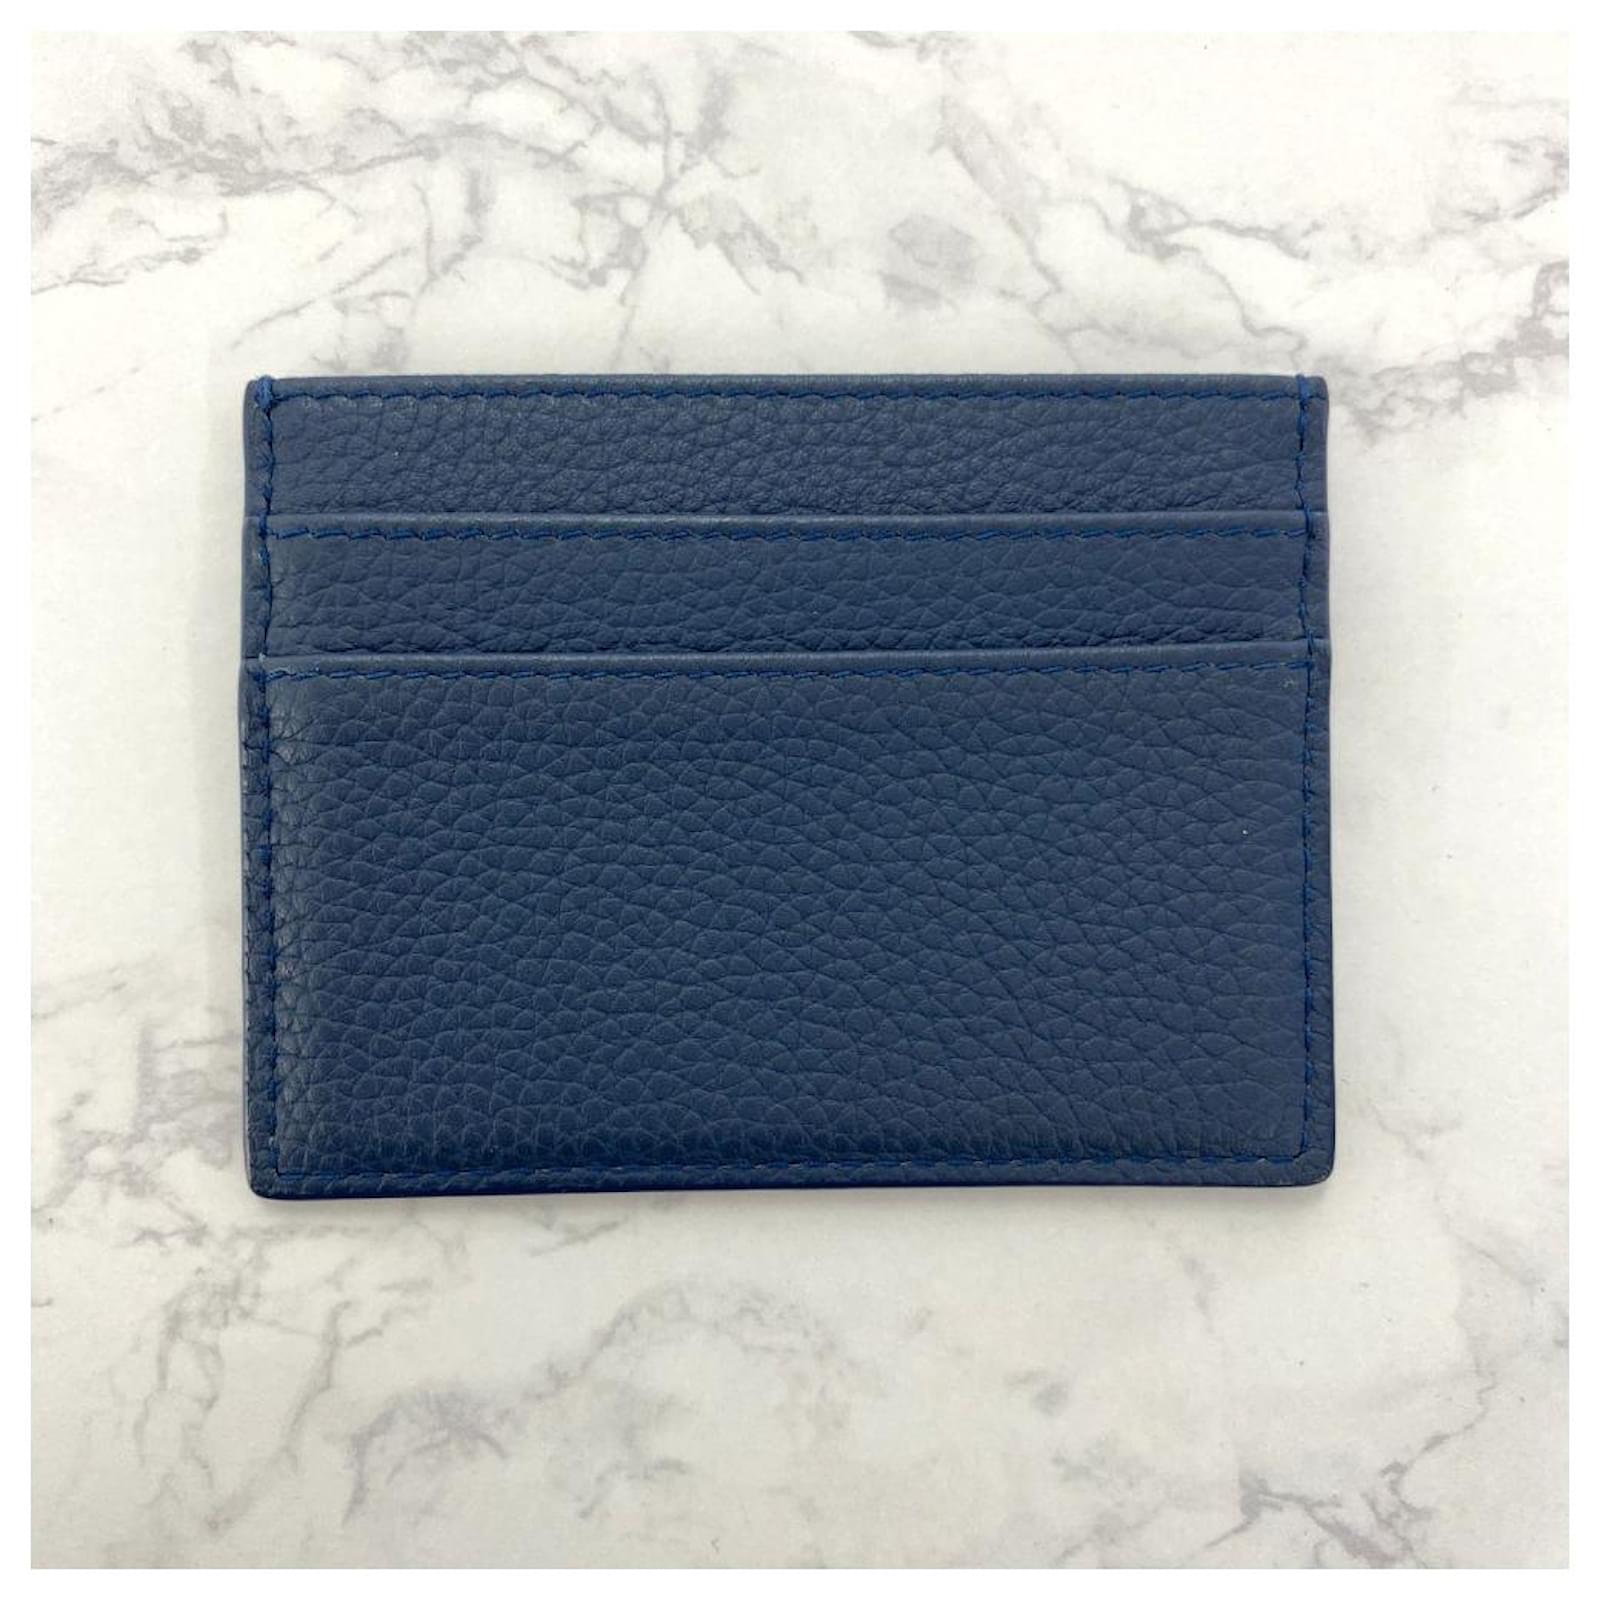 [Used] Christian Dior ATELIER Atelier logo Business card holder Card ...